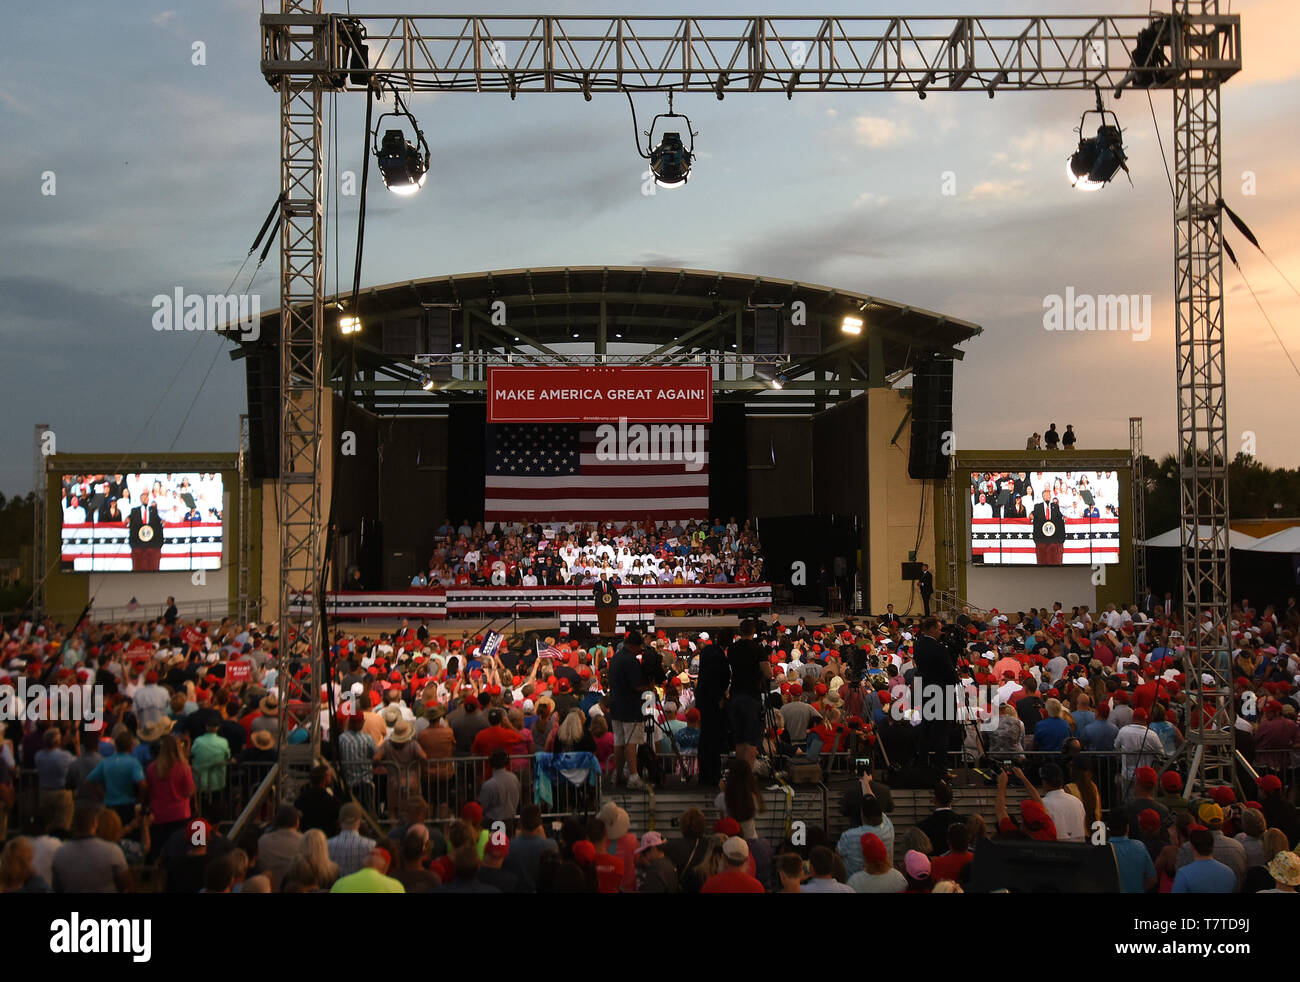 Florida, USA. 08th May, 2019. U.S. President Donald Trump addresses supporters at a Make America Great Again rally at the Aaron Bessant Park  Amphitheater on May 8, 2019 in Panama City Beach, Florida. Credit: Paul Hennessy/Alamy Live News Stock Photo